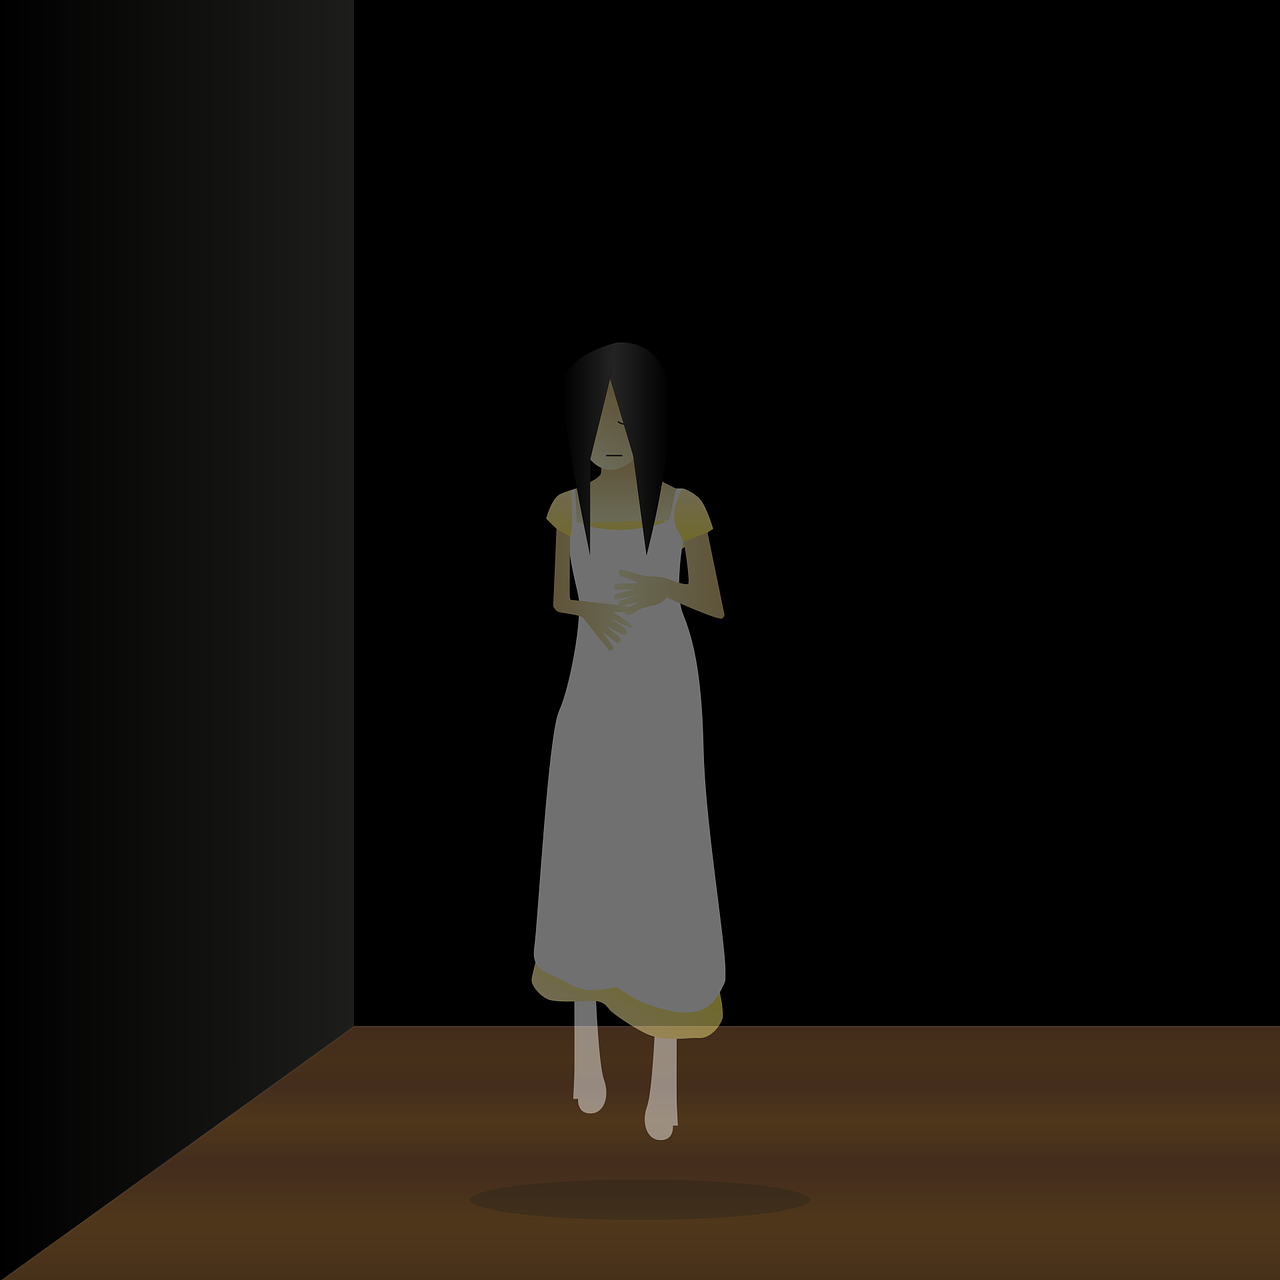 there is a woman standing in a dark room